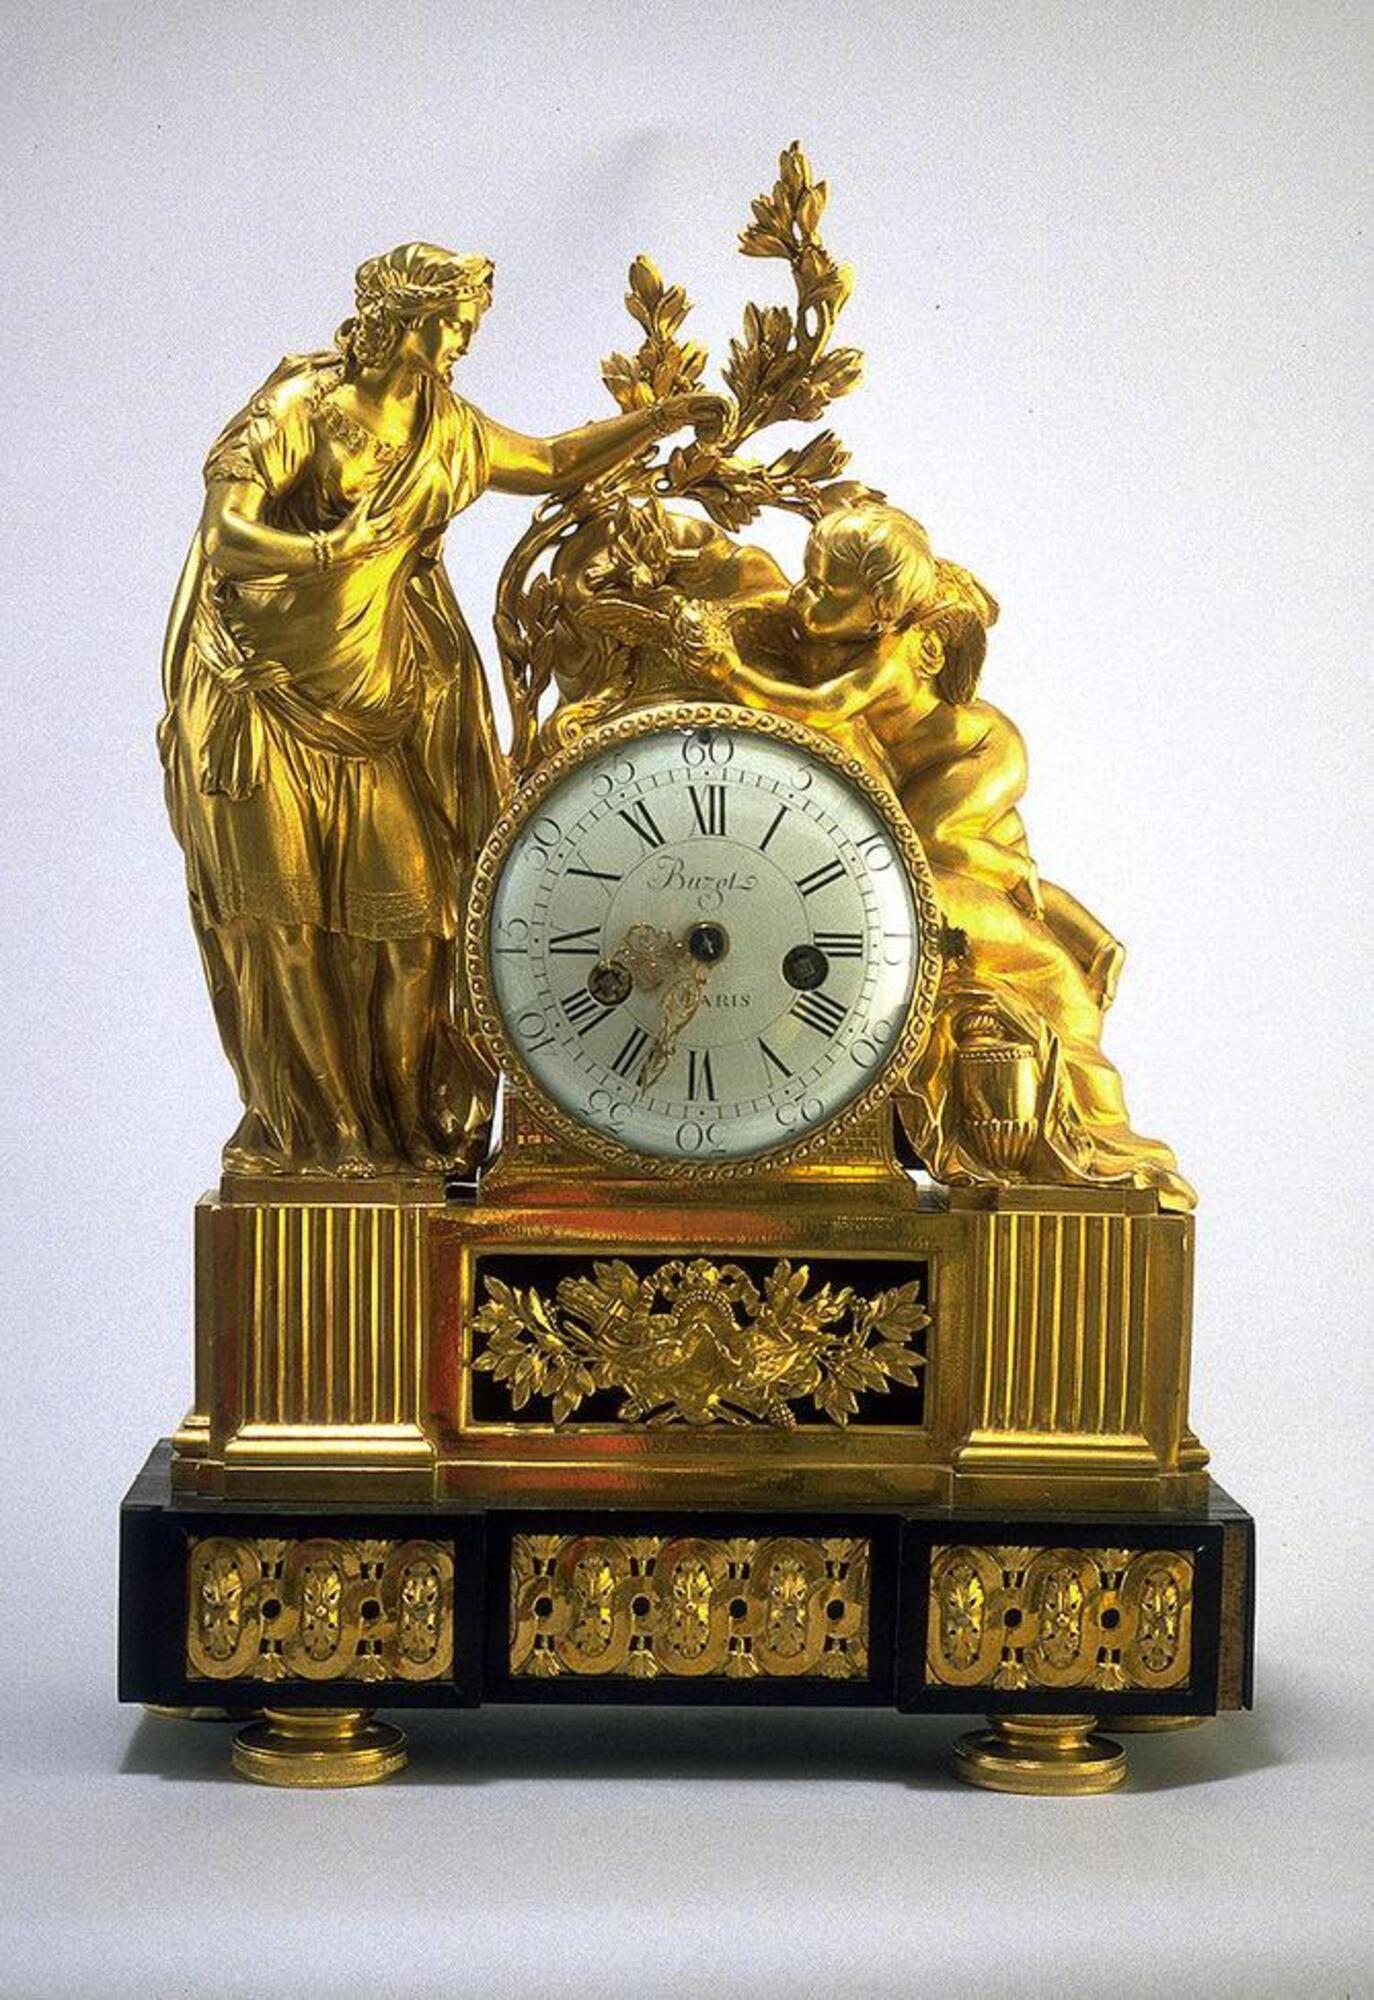 The dial of this elaborately decorated clock stands upon a two-tiered base. The lower tier consists of a hollow base made of ebony and adorned with a frieze of gilded bronze scrollwork and palmette motifs. The upper tier, made entirely of gilded bronze, features six fluted pilasters with a decorative panel centered on the front below the dial. This panel is composed of a pair of doves touching beaks before a crossed quiver of arrows and a flaming torch framed by leaves. A woman in long flowing robes stands to the right of the dial and empties a small cup onto a dove held by a winged putto who lies on a rocky projection. Behind the dove burns a fire on a small altar inscribed "Altar of Venus" [Autel à Venus].